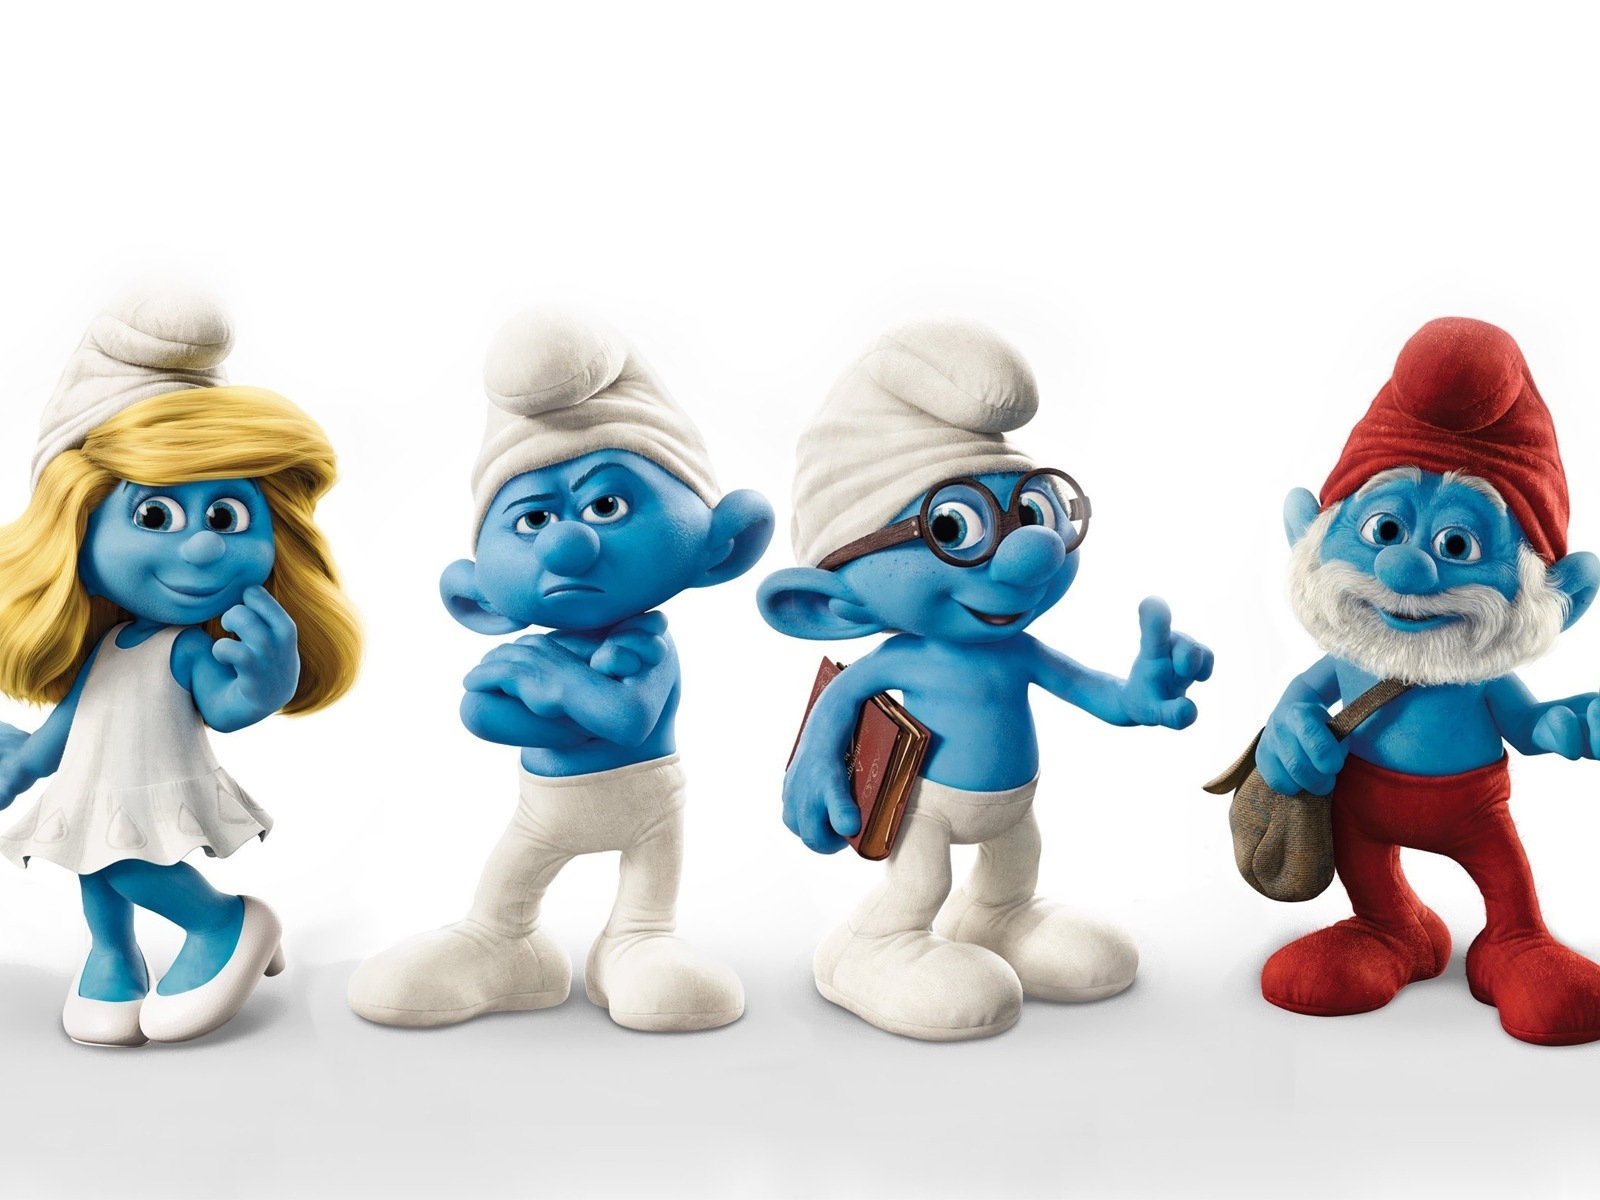 The Smurfs 2 HD movie wallpapers #3 - 1600x1200